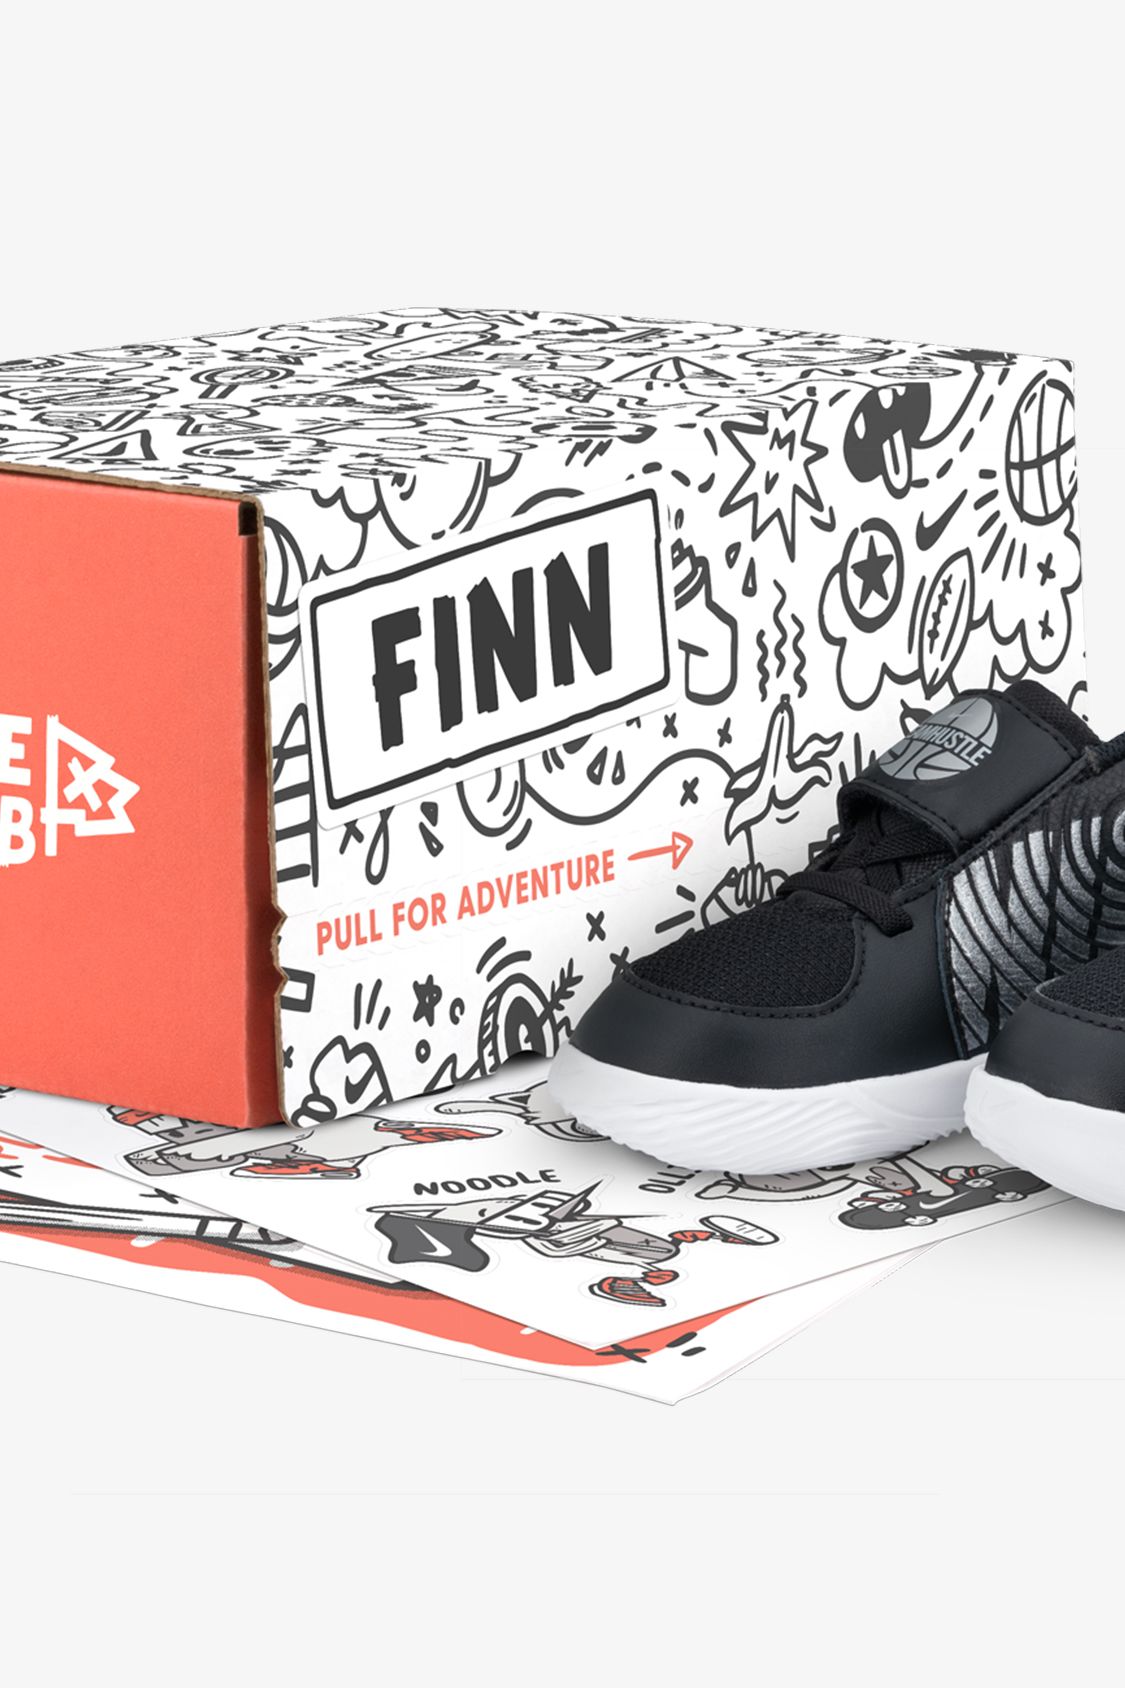 Física personaje pulgar Nike launches a sneaker subscription service for kids | CNN Business